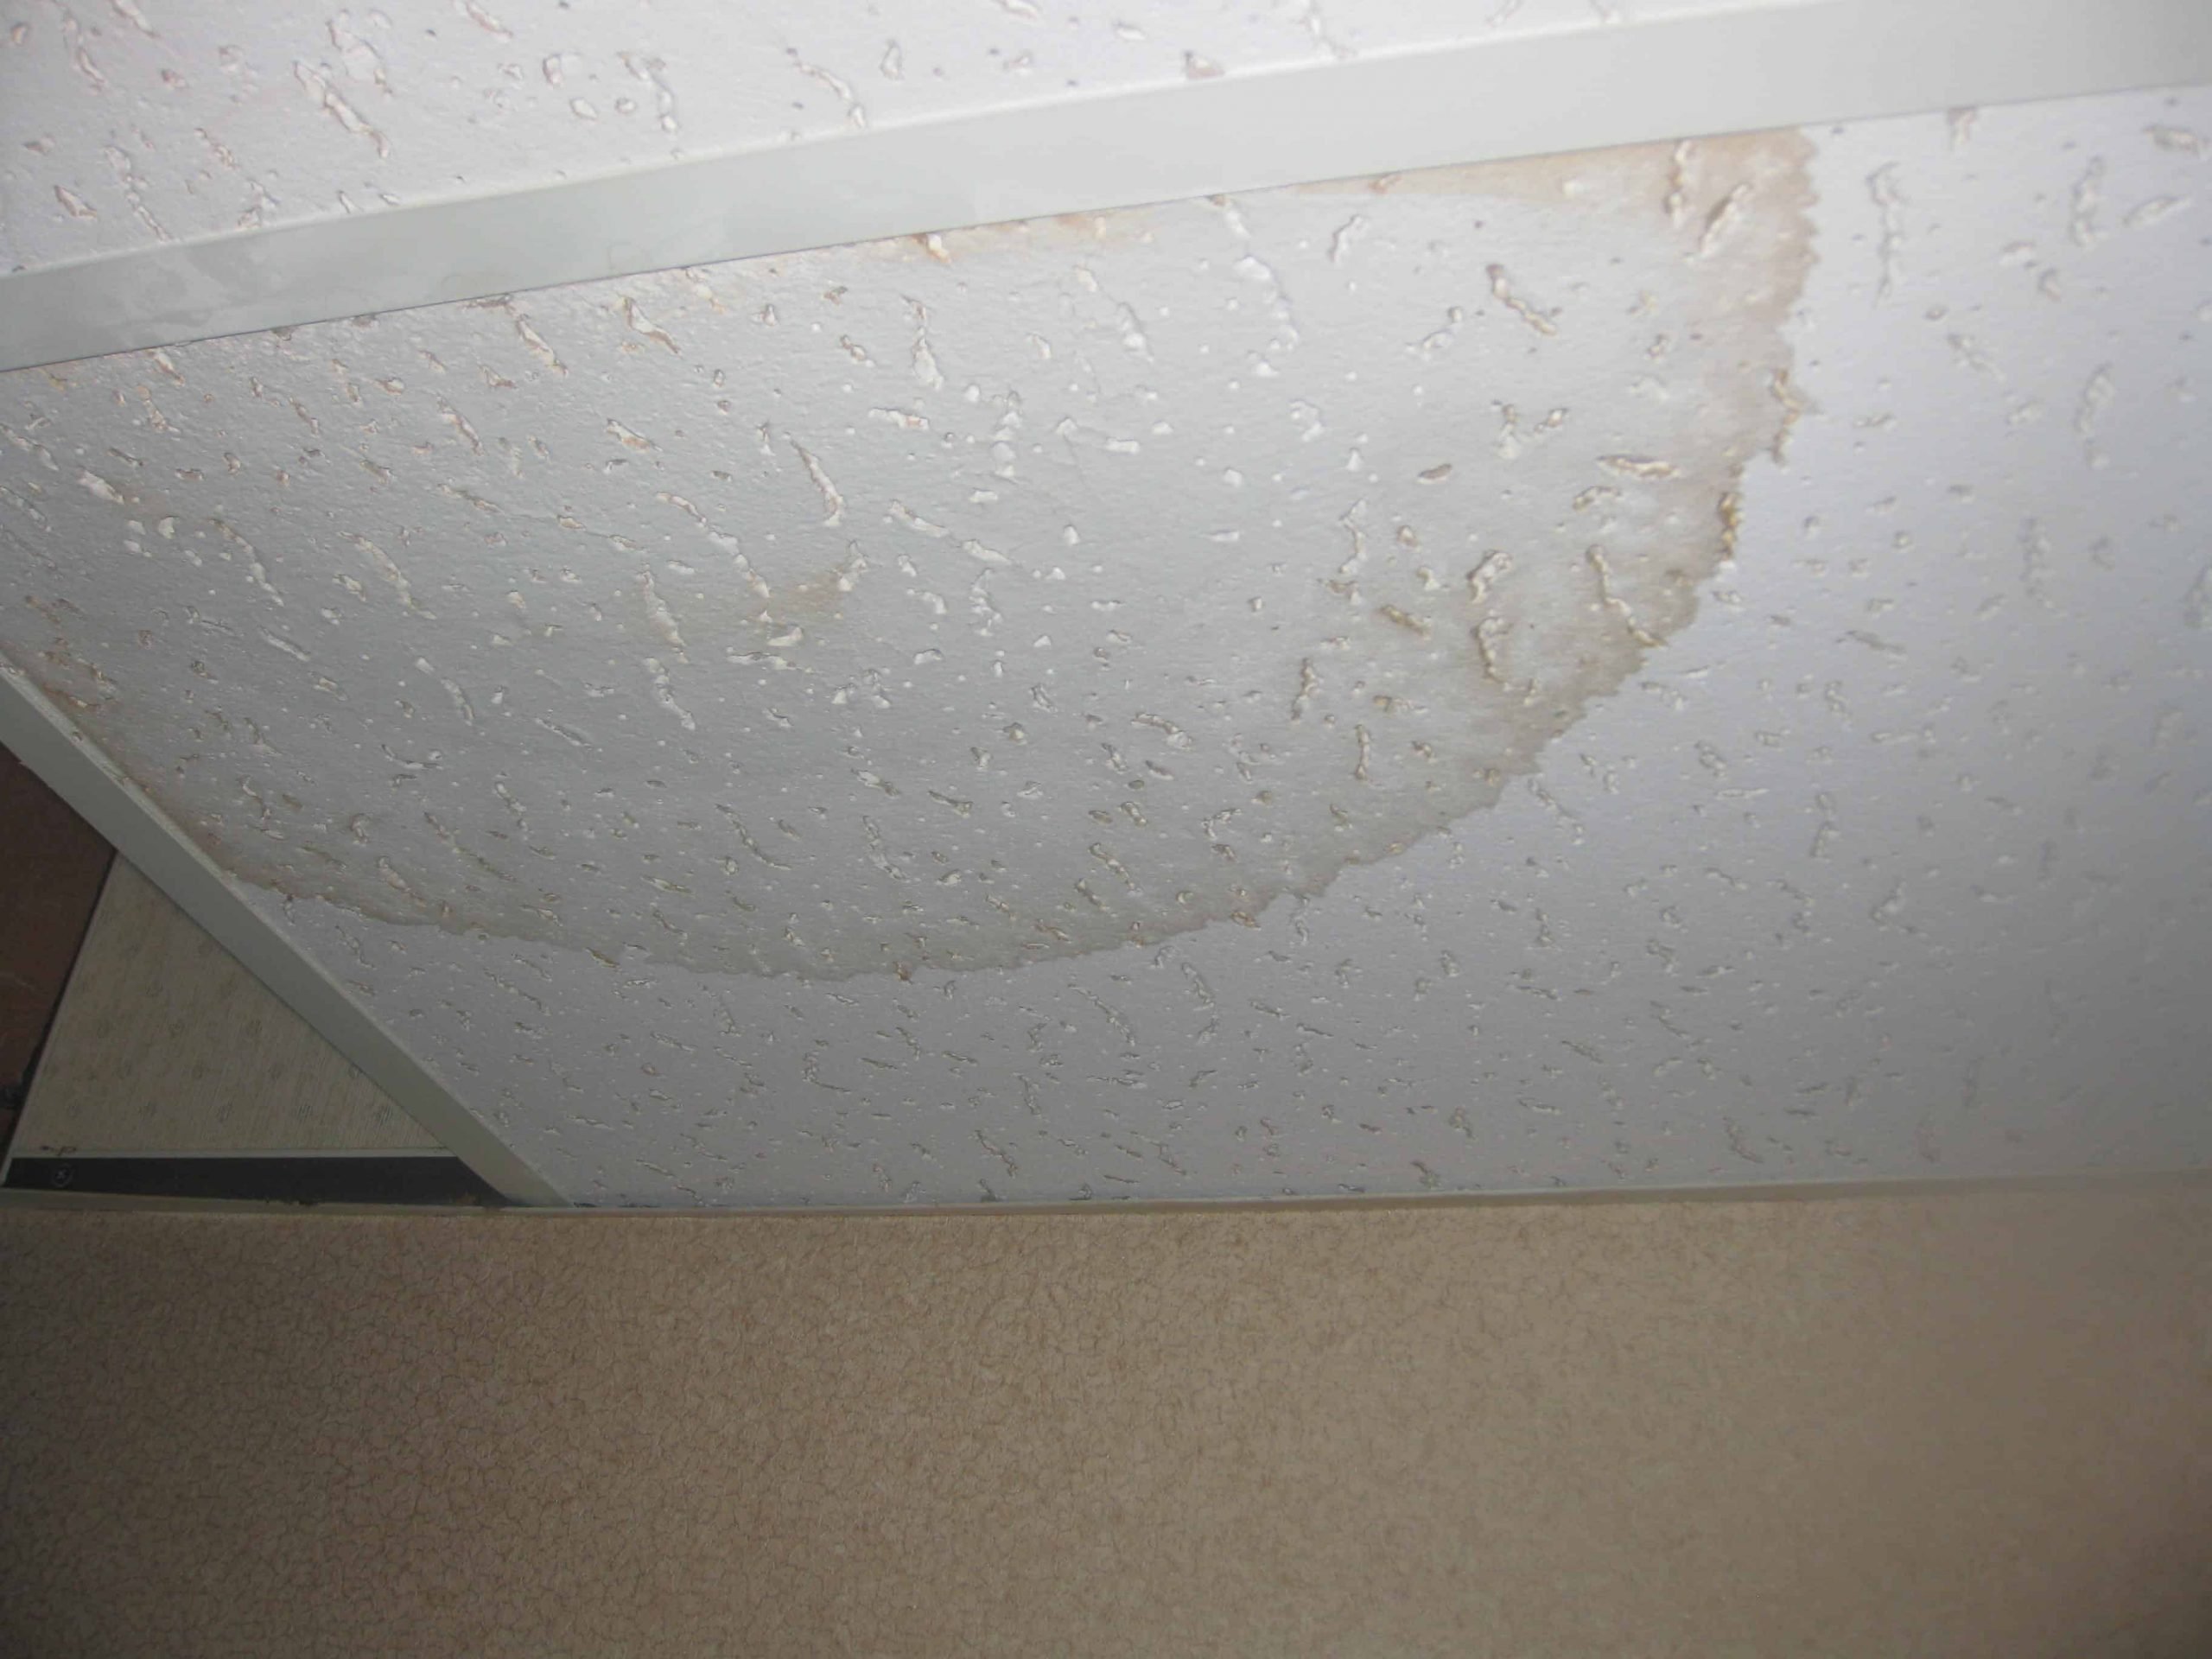 Removing Mold on Ceiling and Keep it From Returning